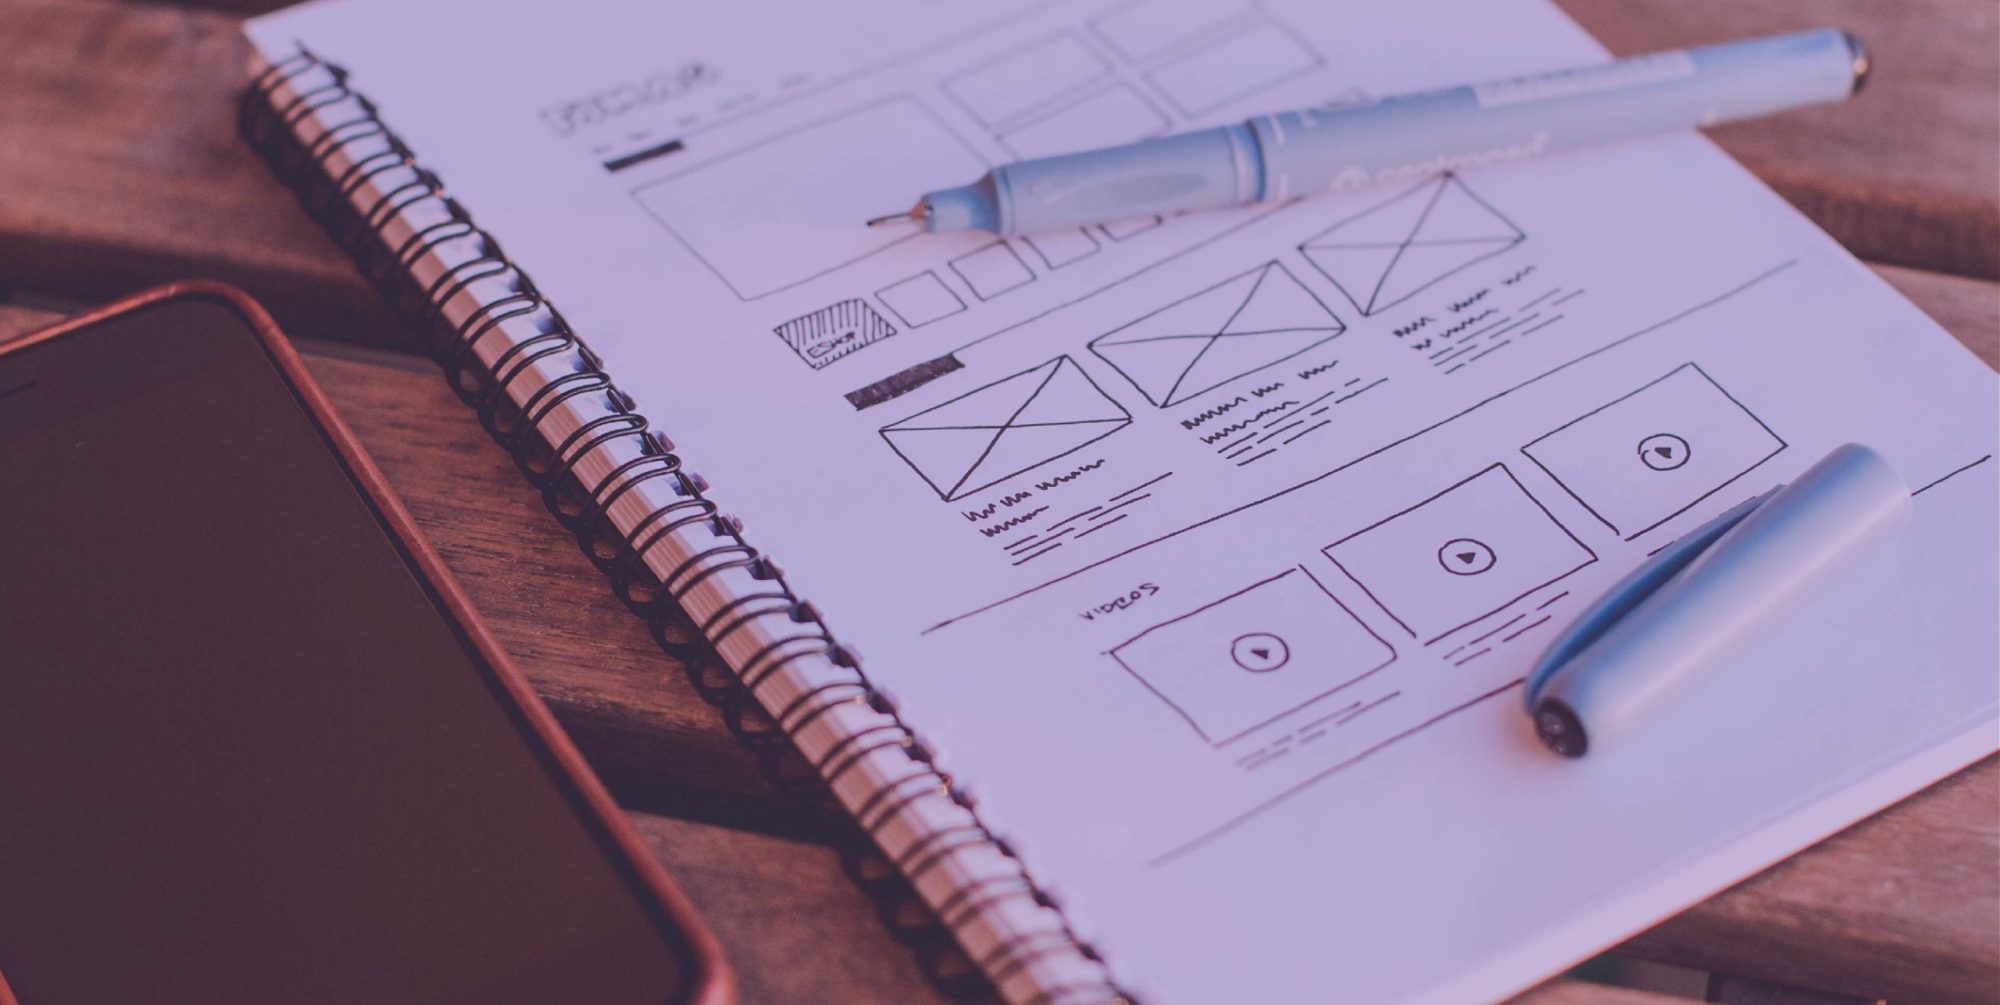 An image of a notebook with a website wireframe